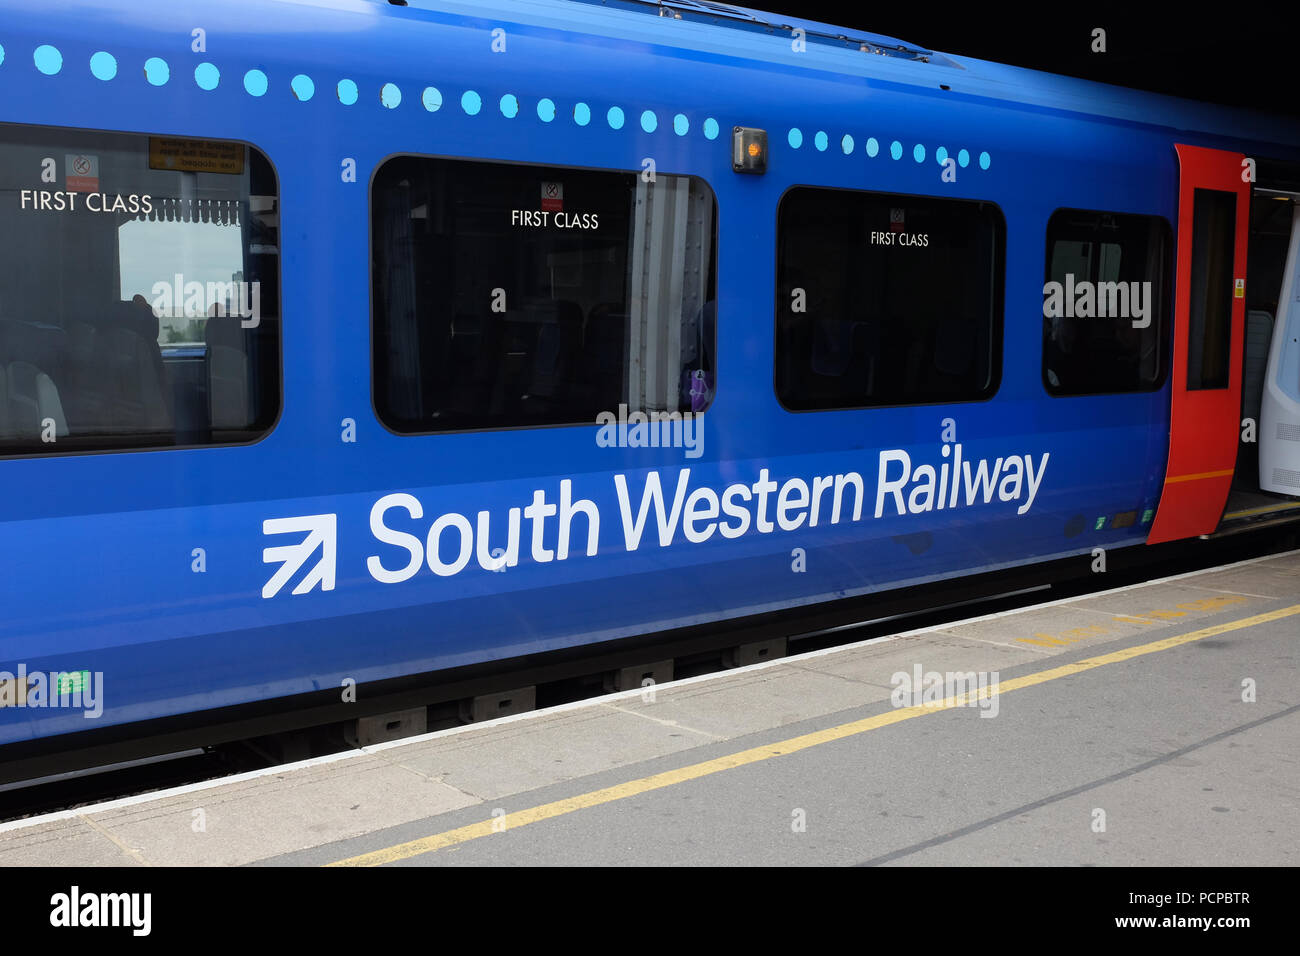 A South Western Railway carriage in England. Stock Photo